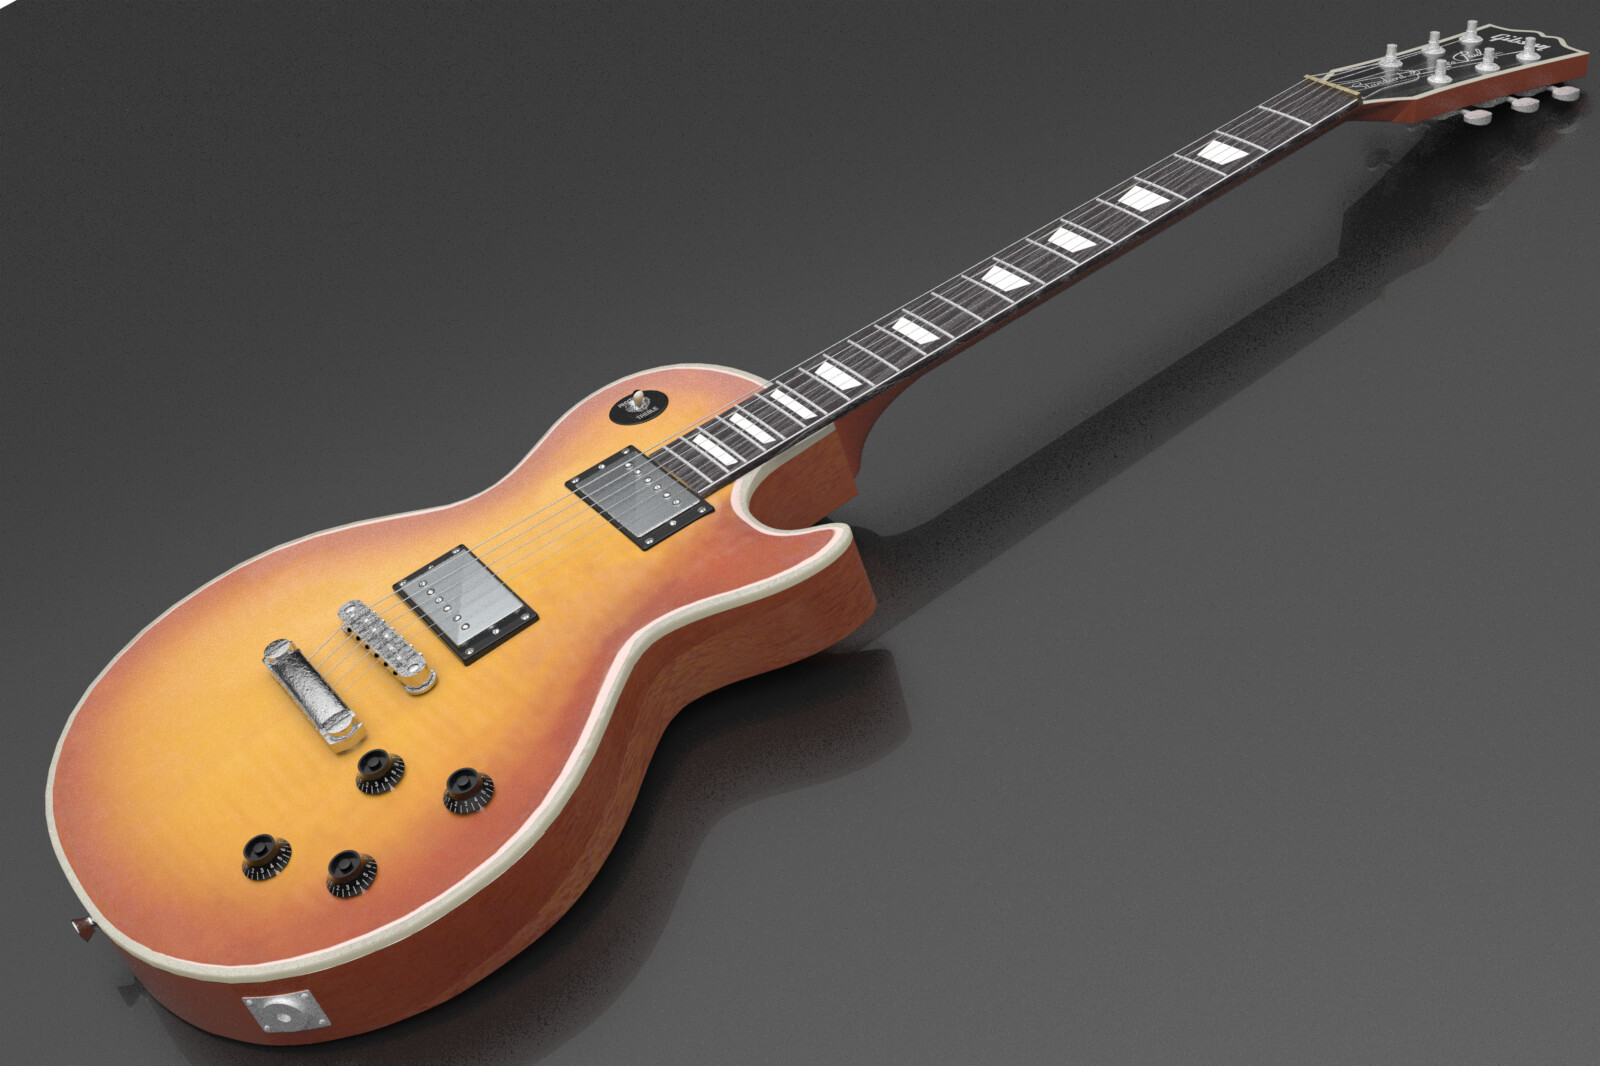 Gibson Les Paul modeled in Modo - this is an in-modo render. I converted this model to a native ArchiCAD object, with appropriate vectorial cleanups and the ability for the materials to be easily tweaked in use.